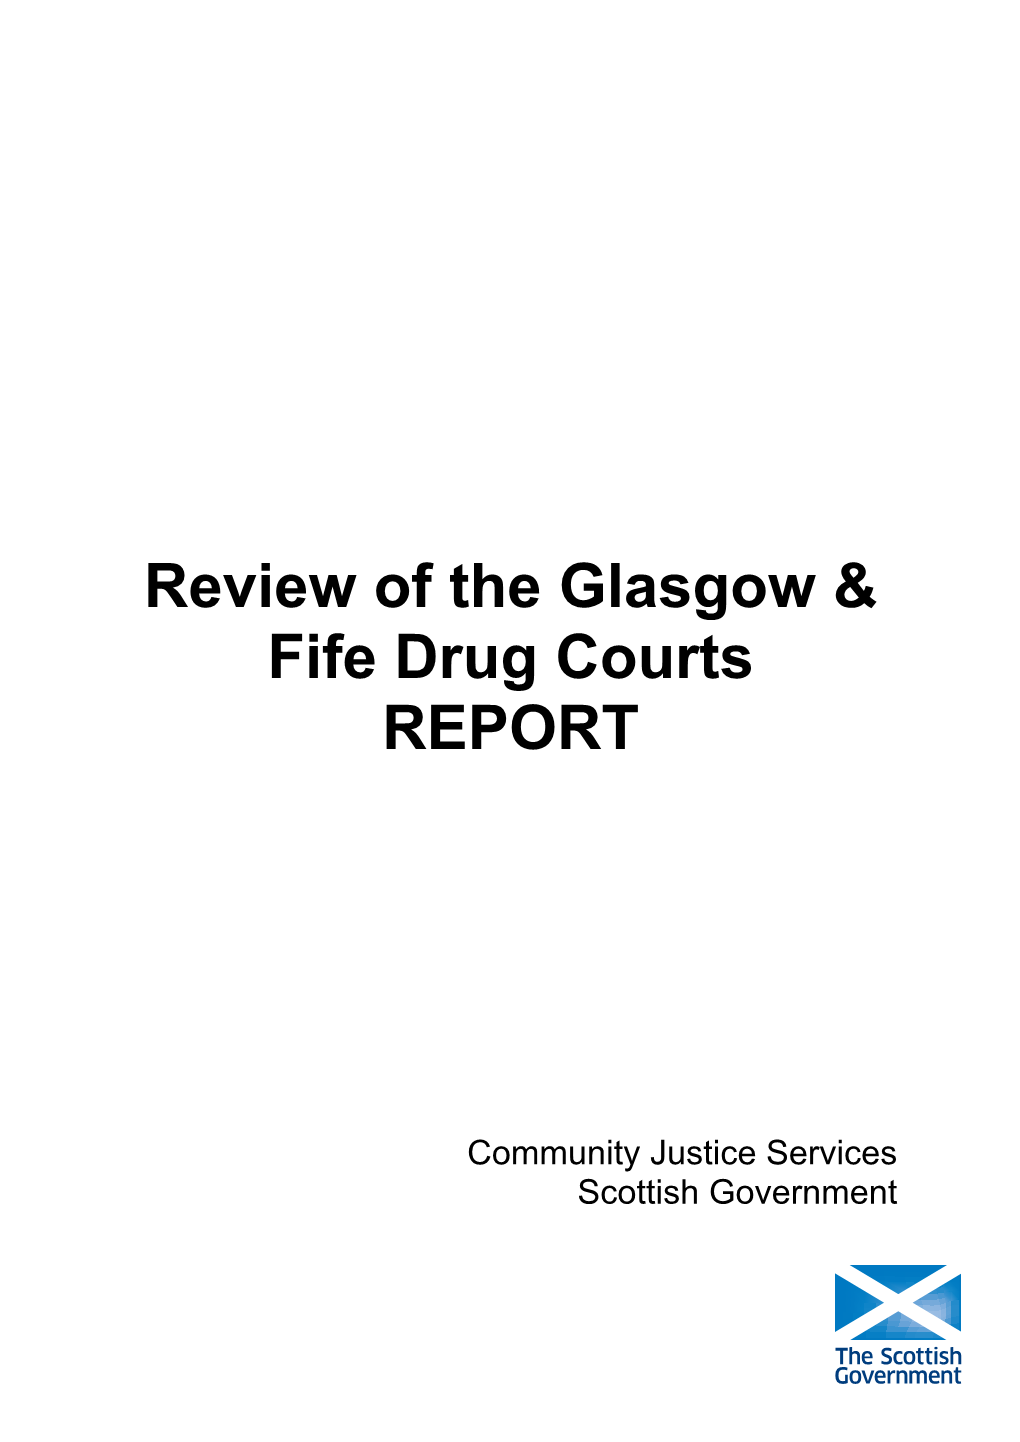 Review of the Glasgow and Fife Drug Courts: Report